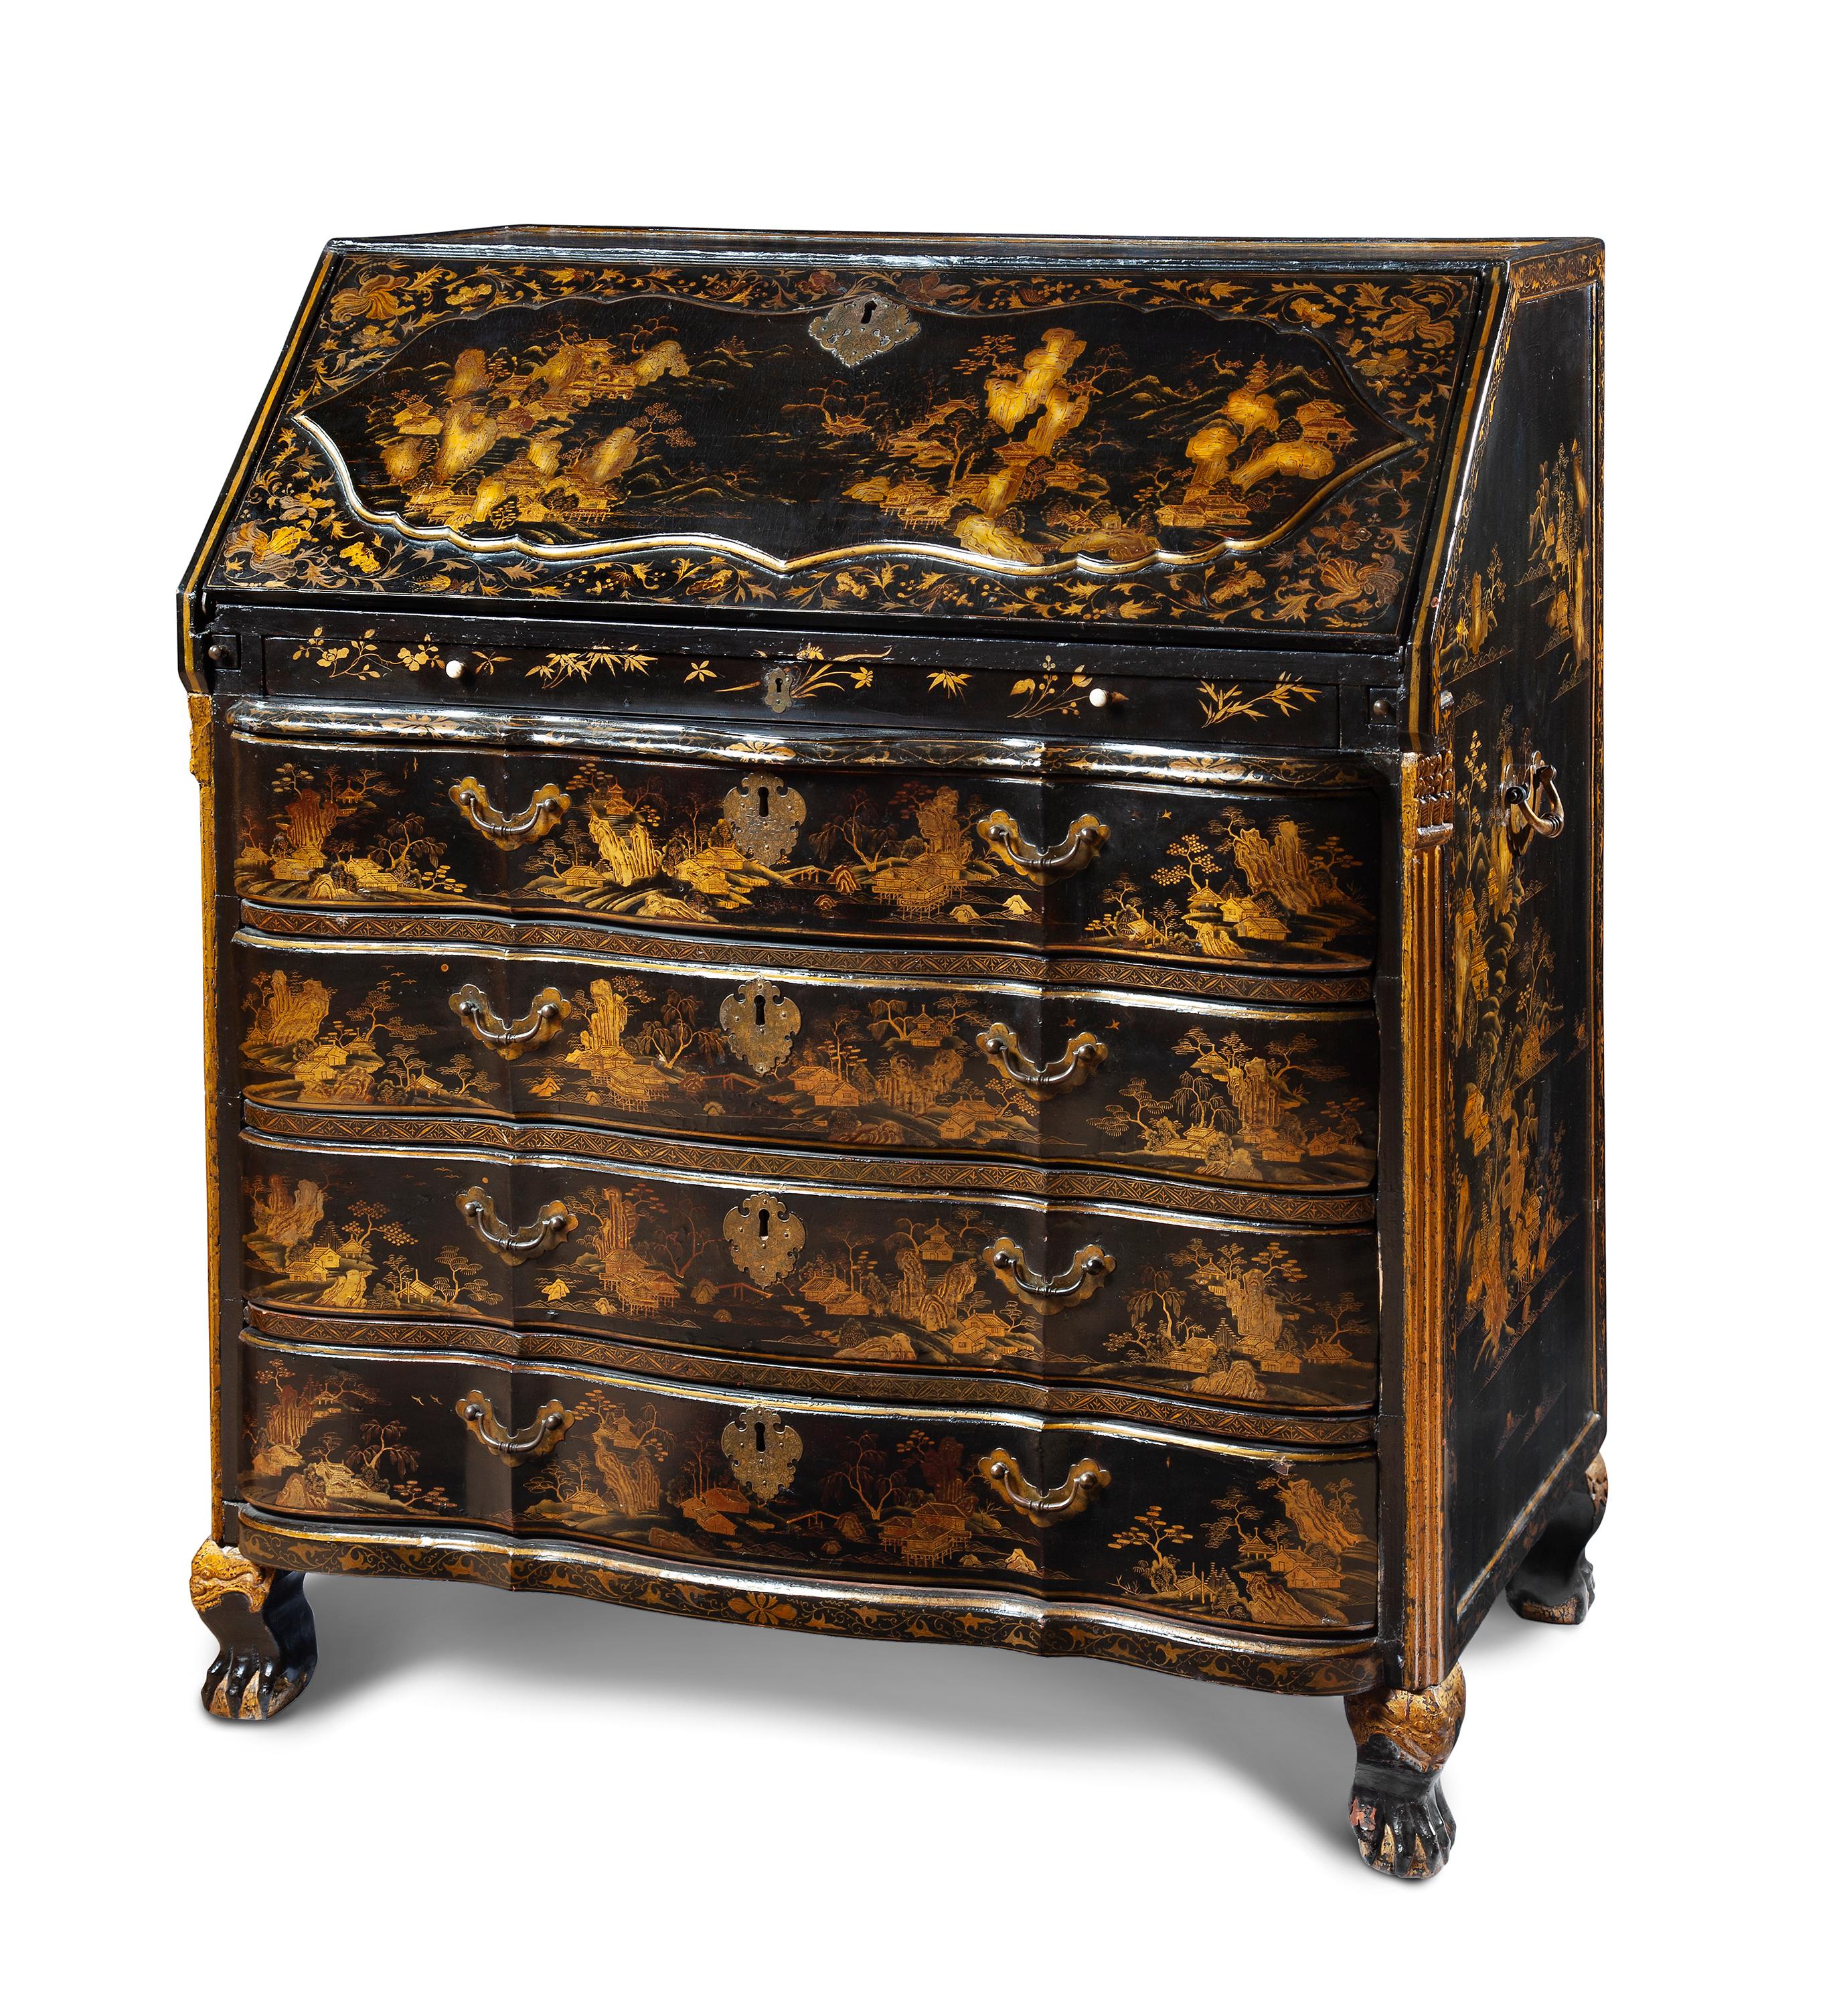 Wood 18th Century Chinese Export Lacquer Chinoiserie Bureau Desk for the Dutch Market For Sale